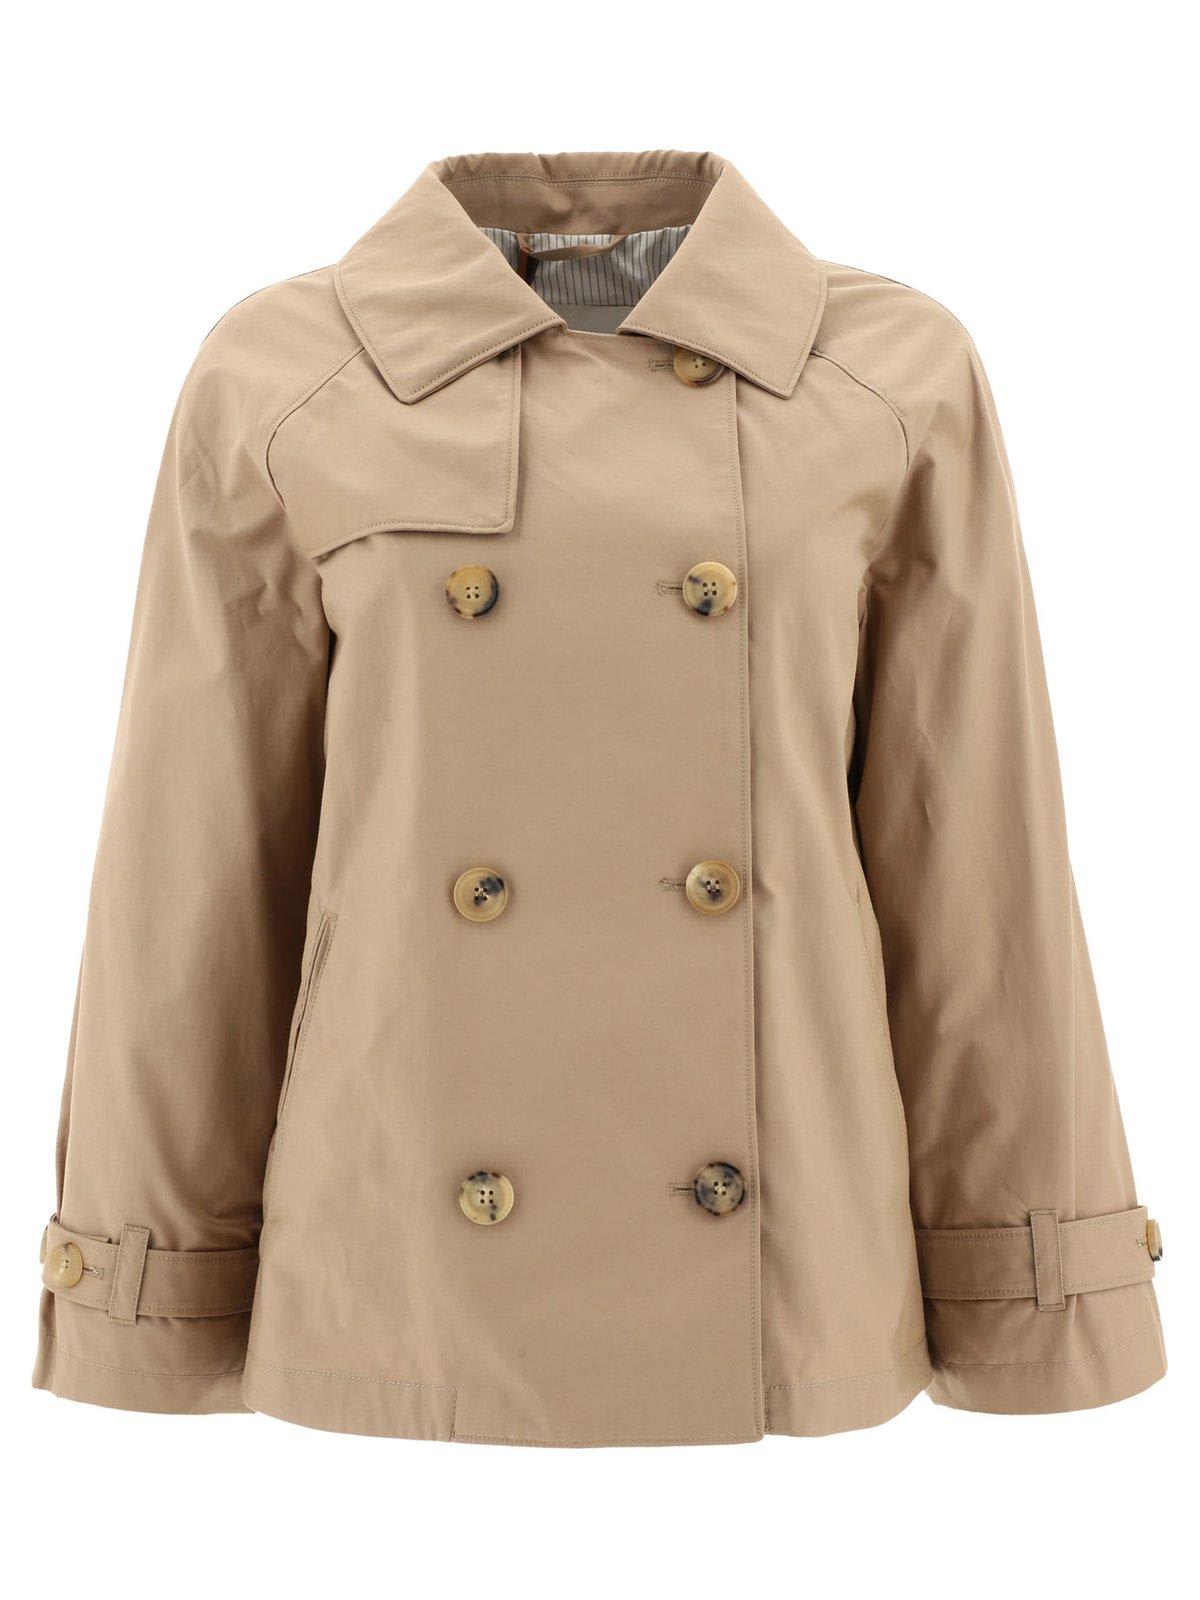 Max Mara The Cube Double Breasted Overiszed Trench Coat